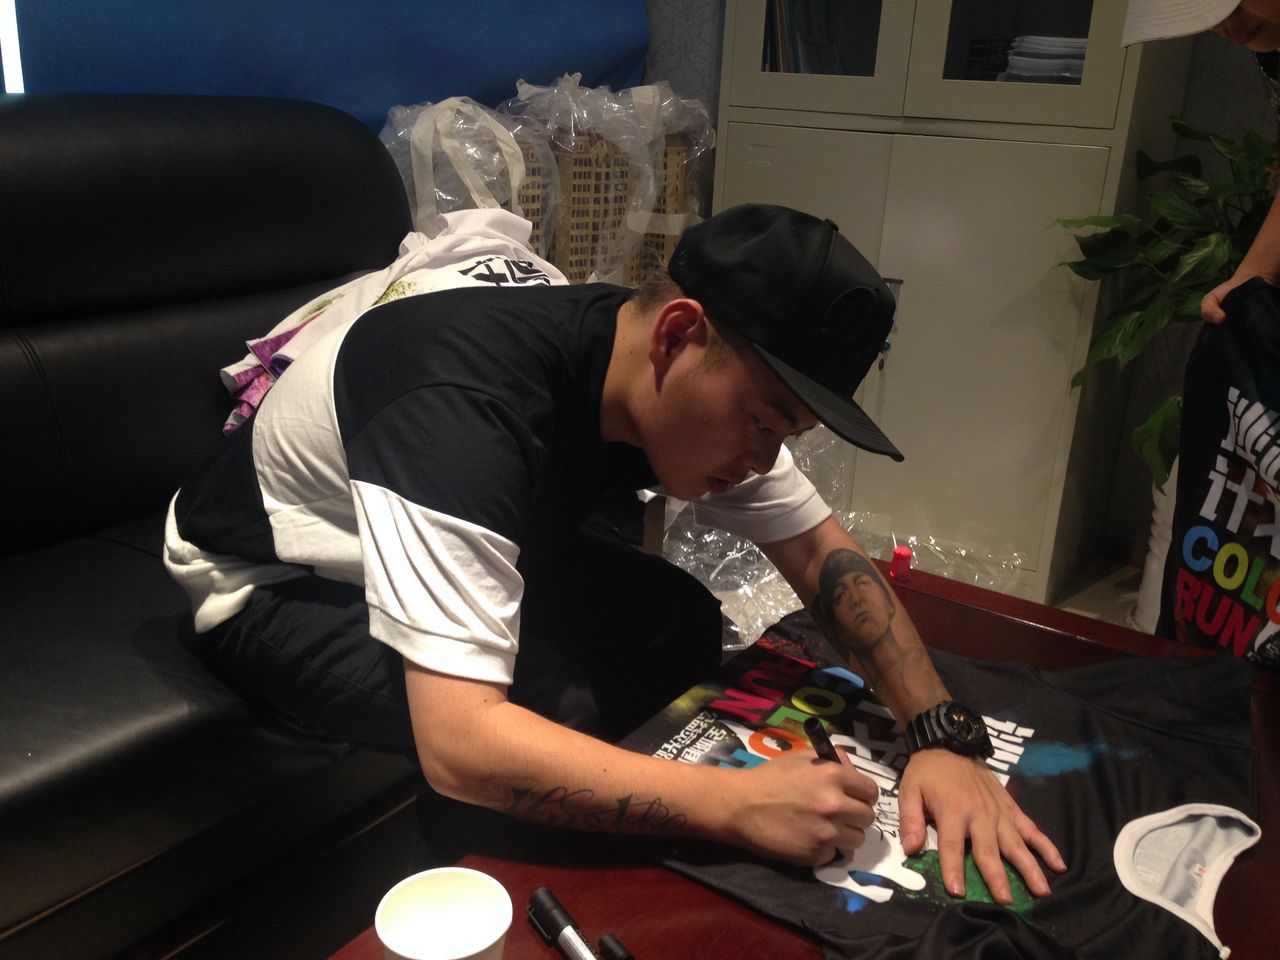 Fat Shady signs autographs backstage before a show in Luzhou.